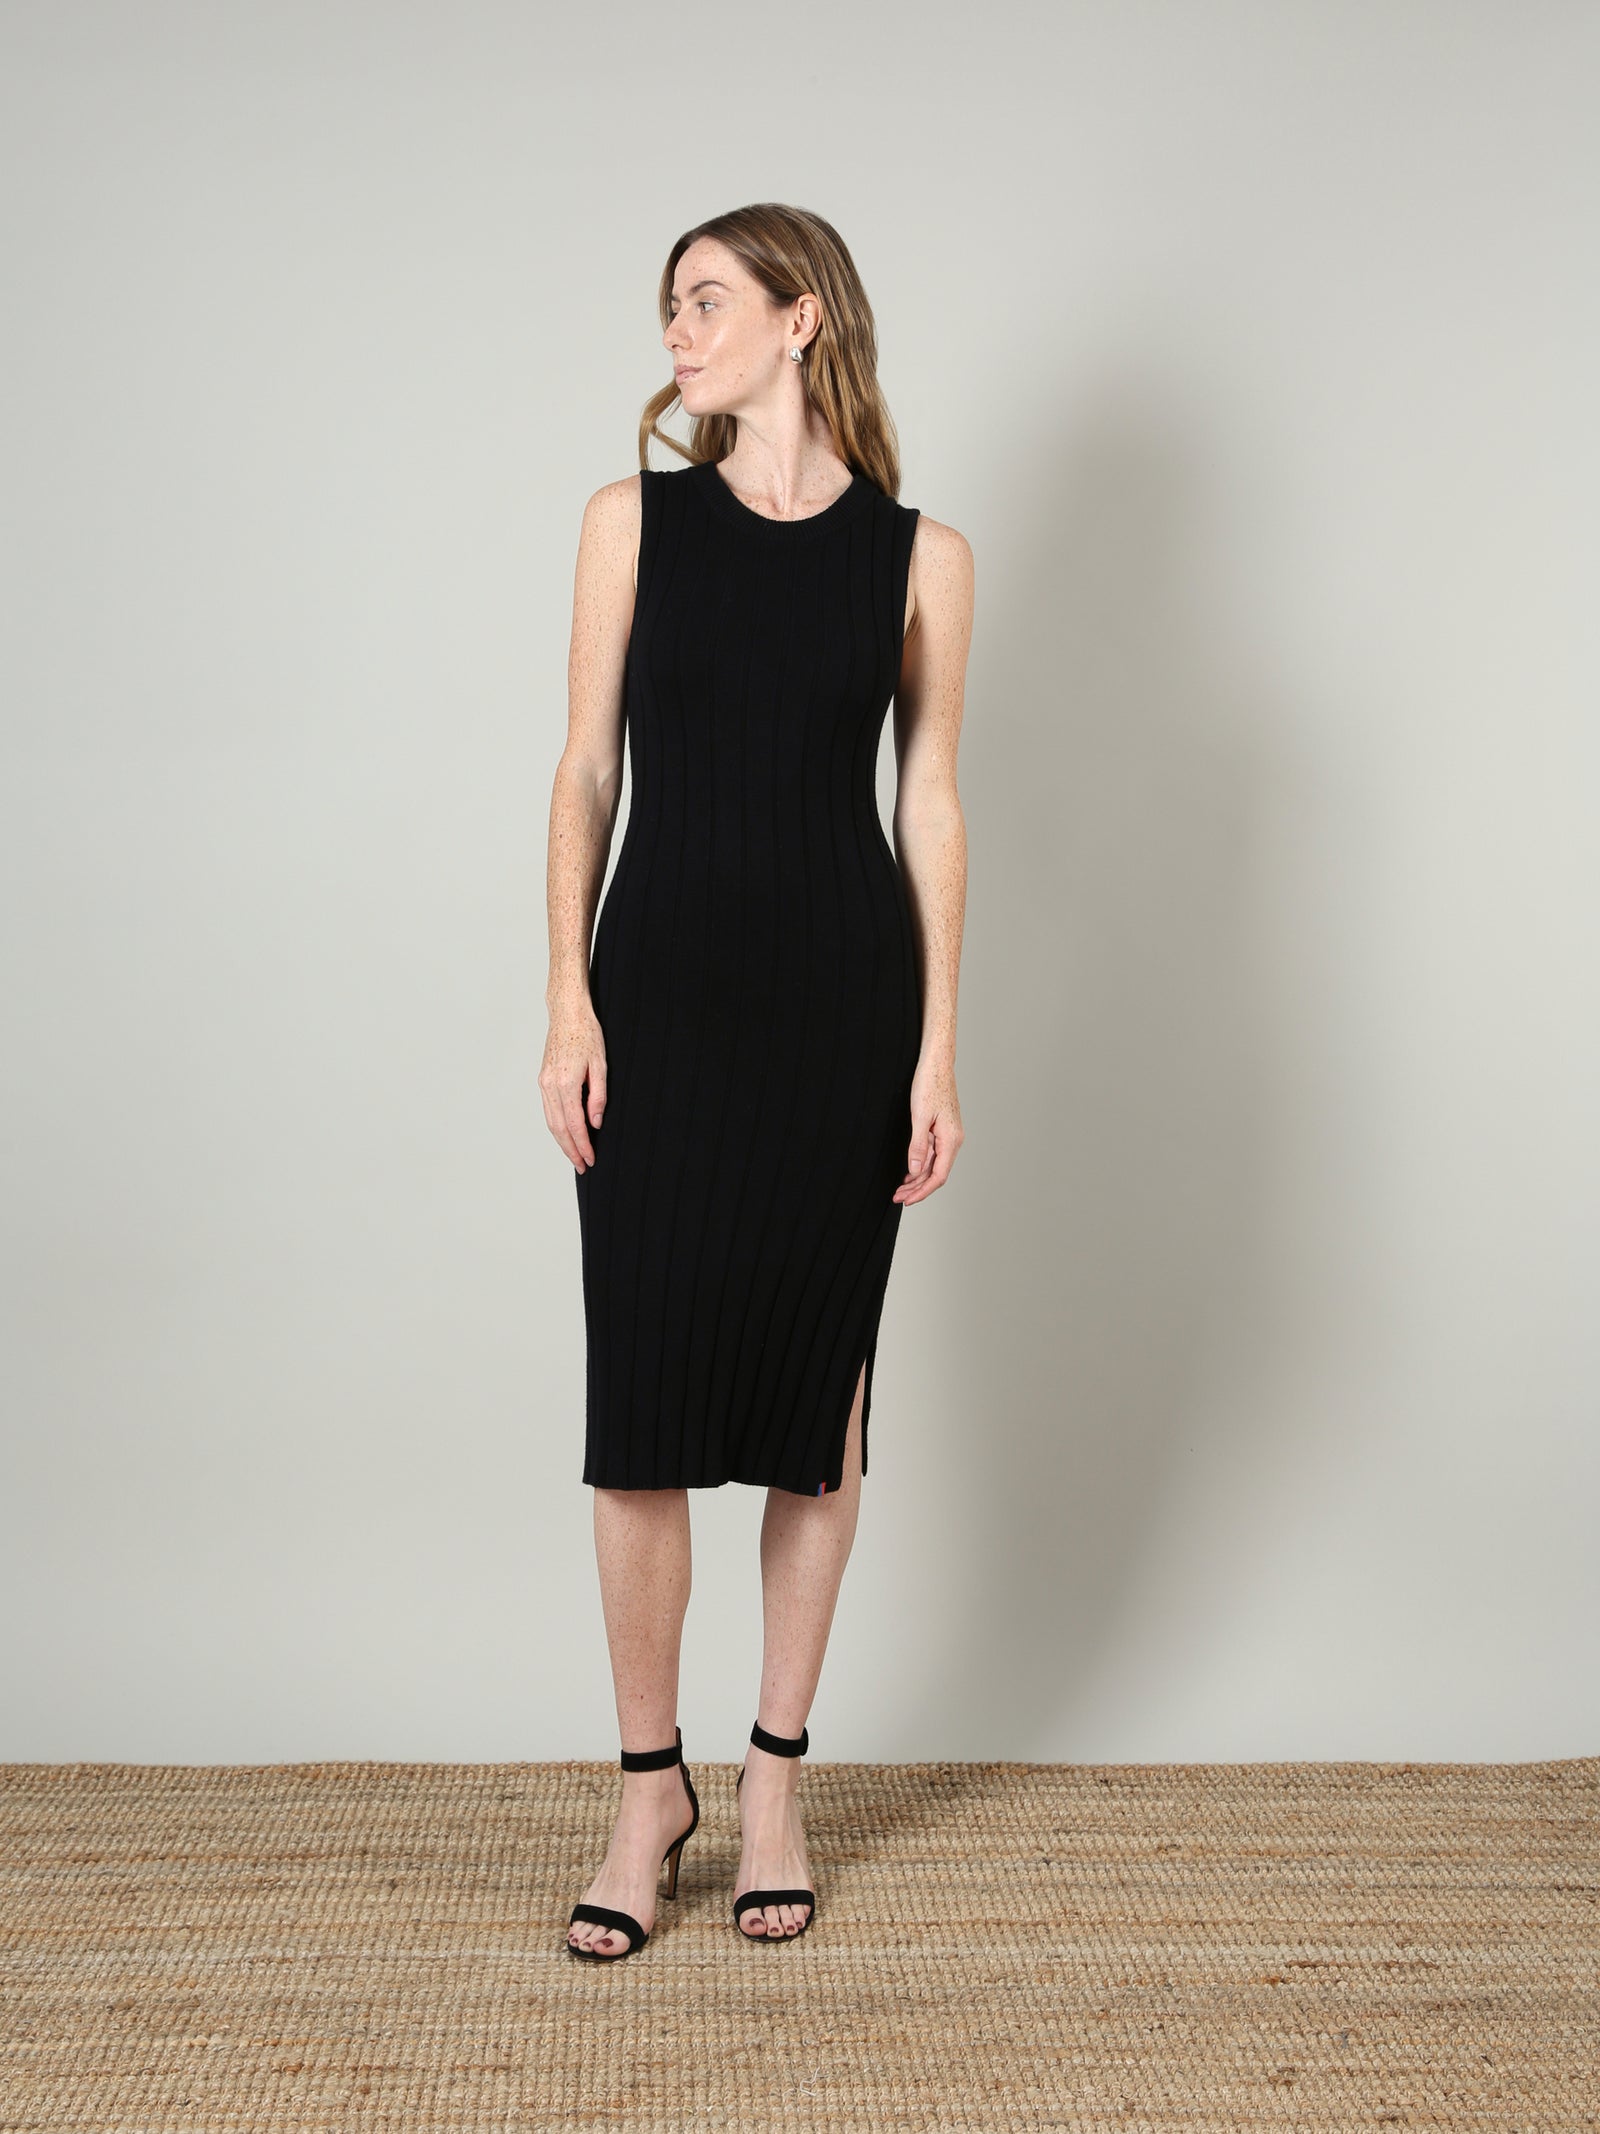 The Clemence Dress